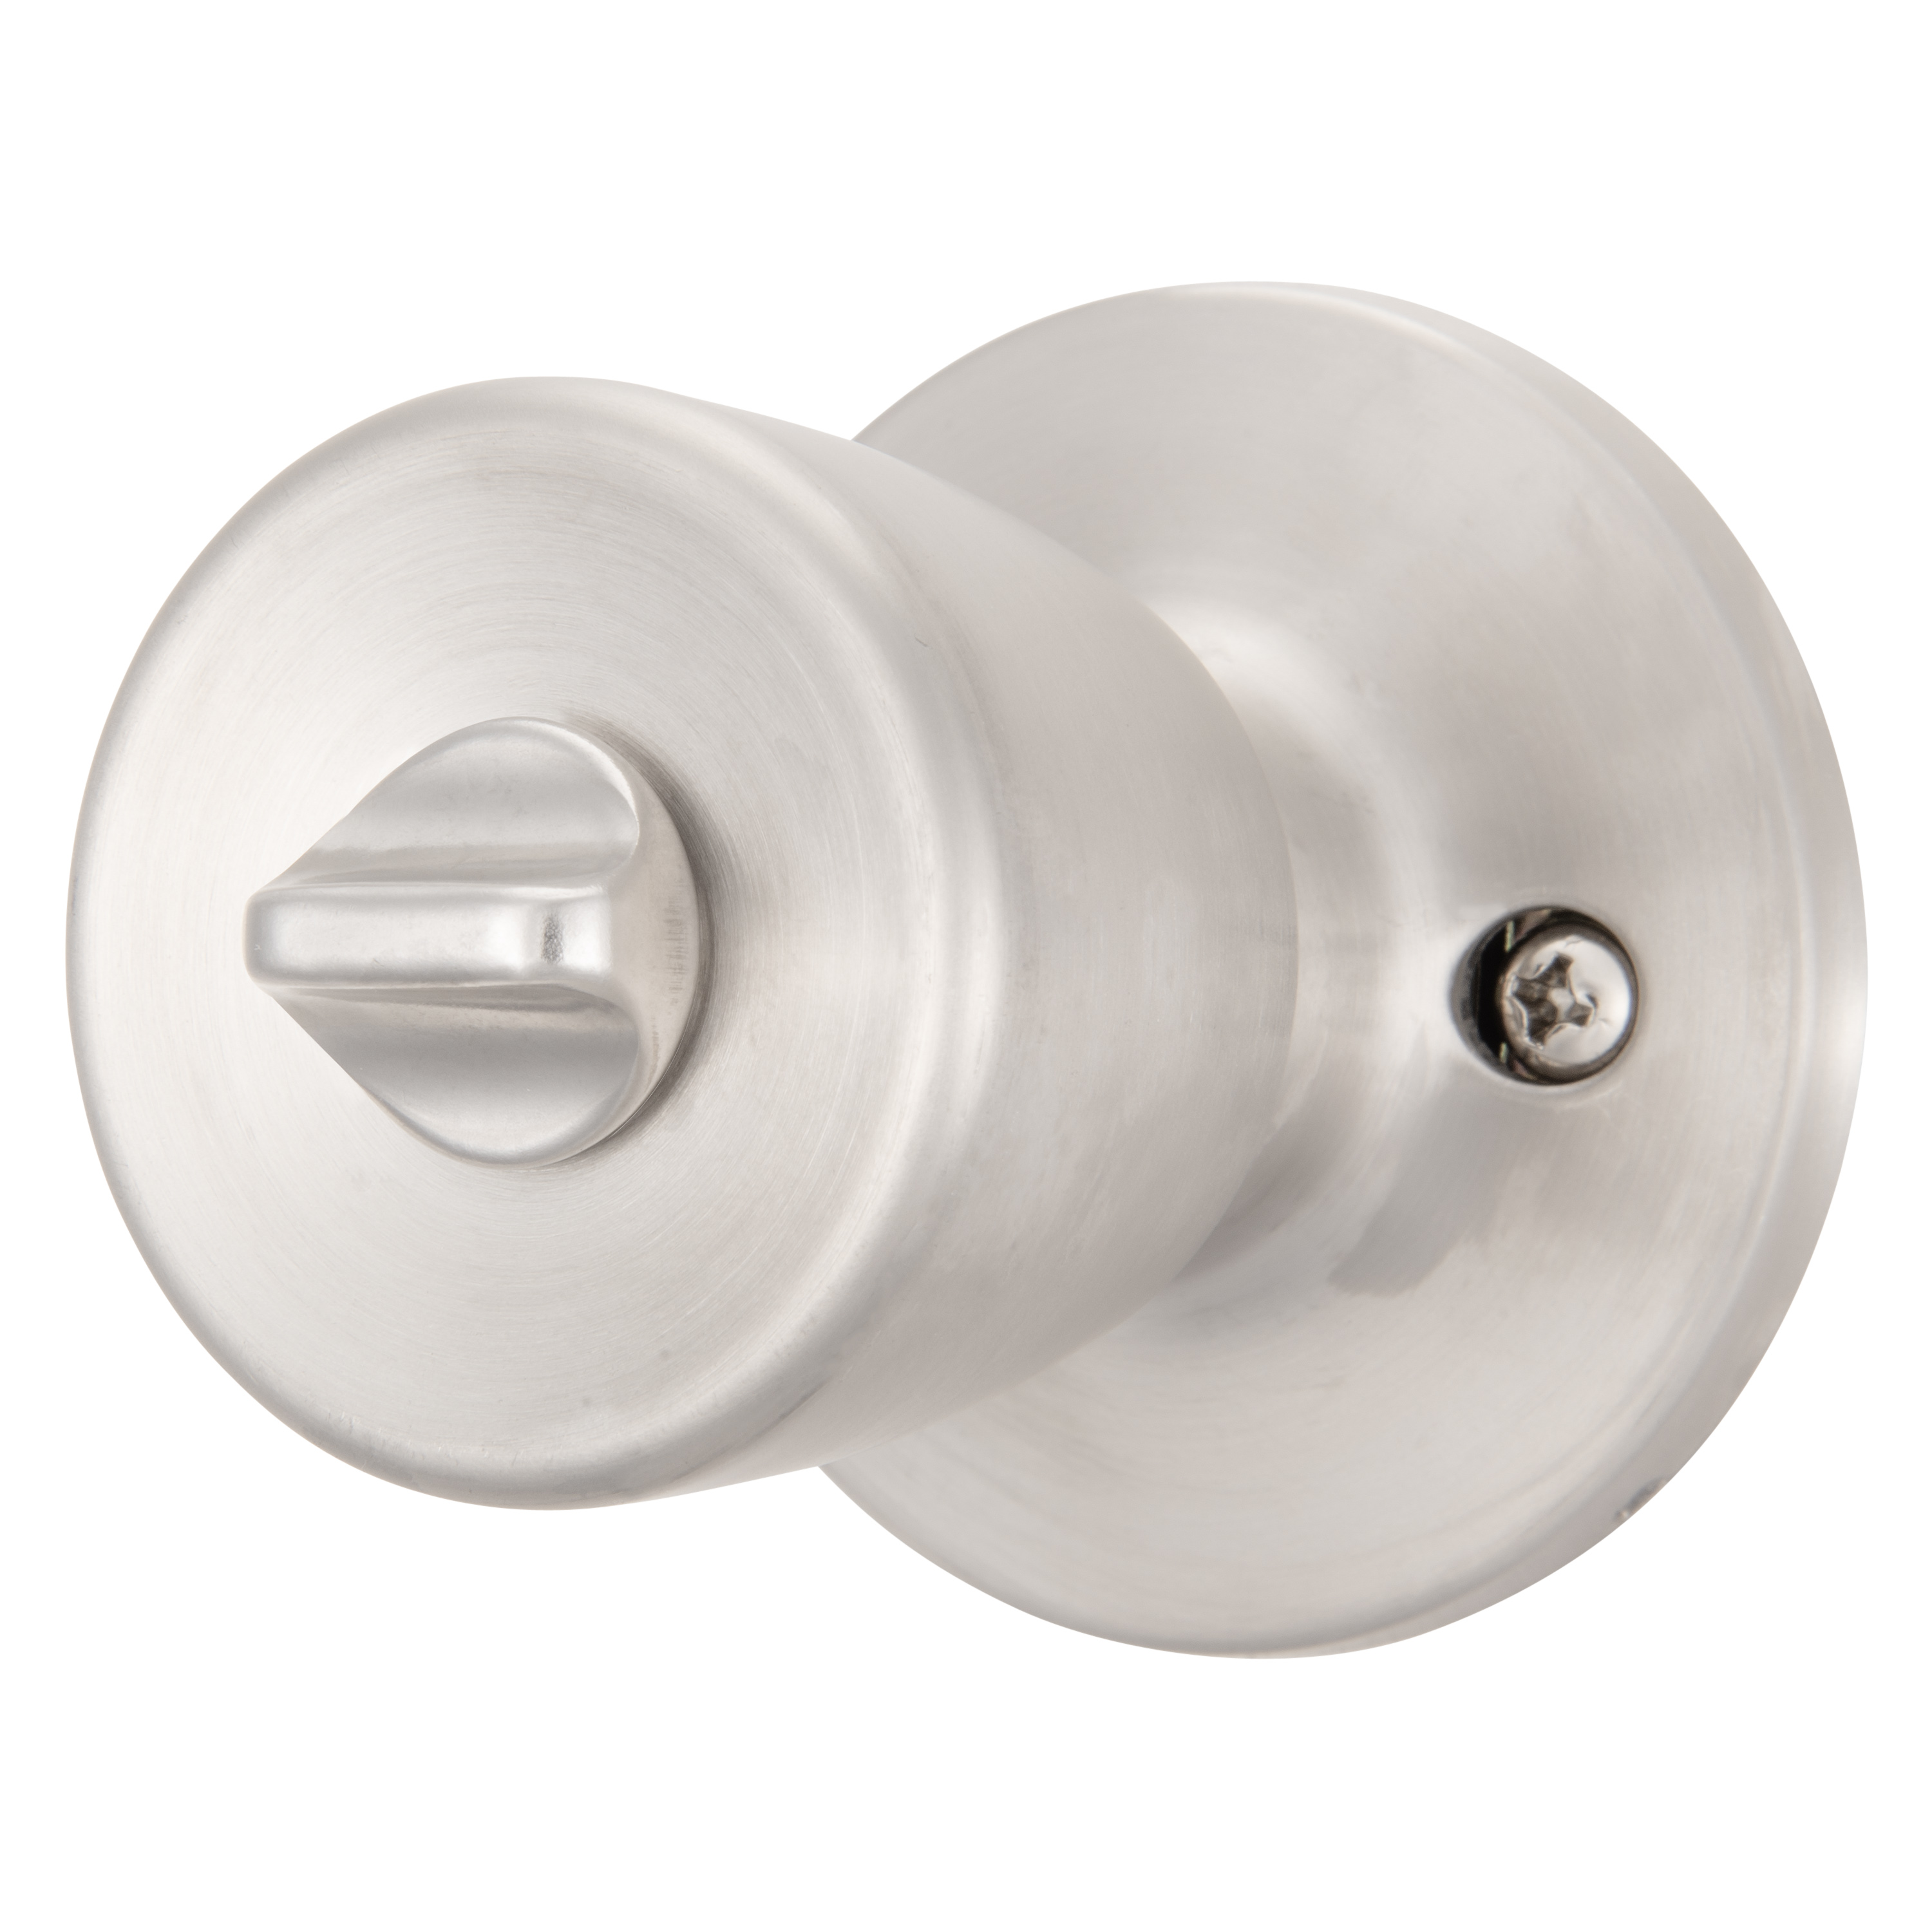 Brinks Mobile Home Keyed Entry Bell Style Doorknob, Stainless Steel Finish - image 3 of 10